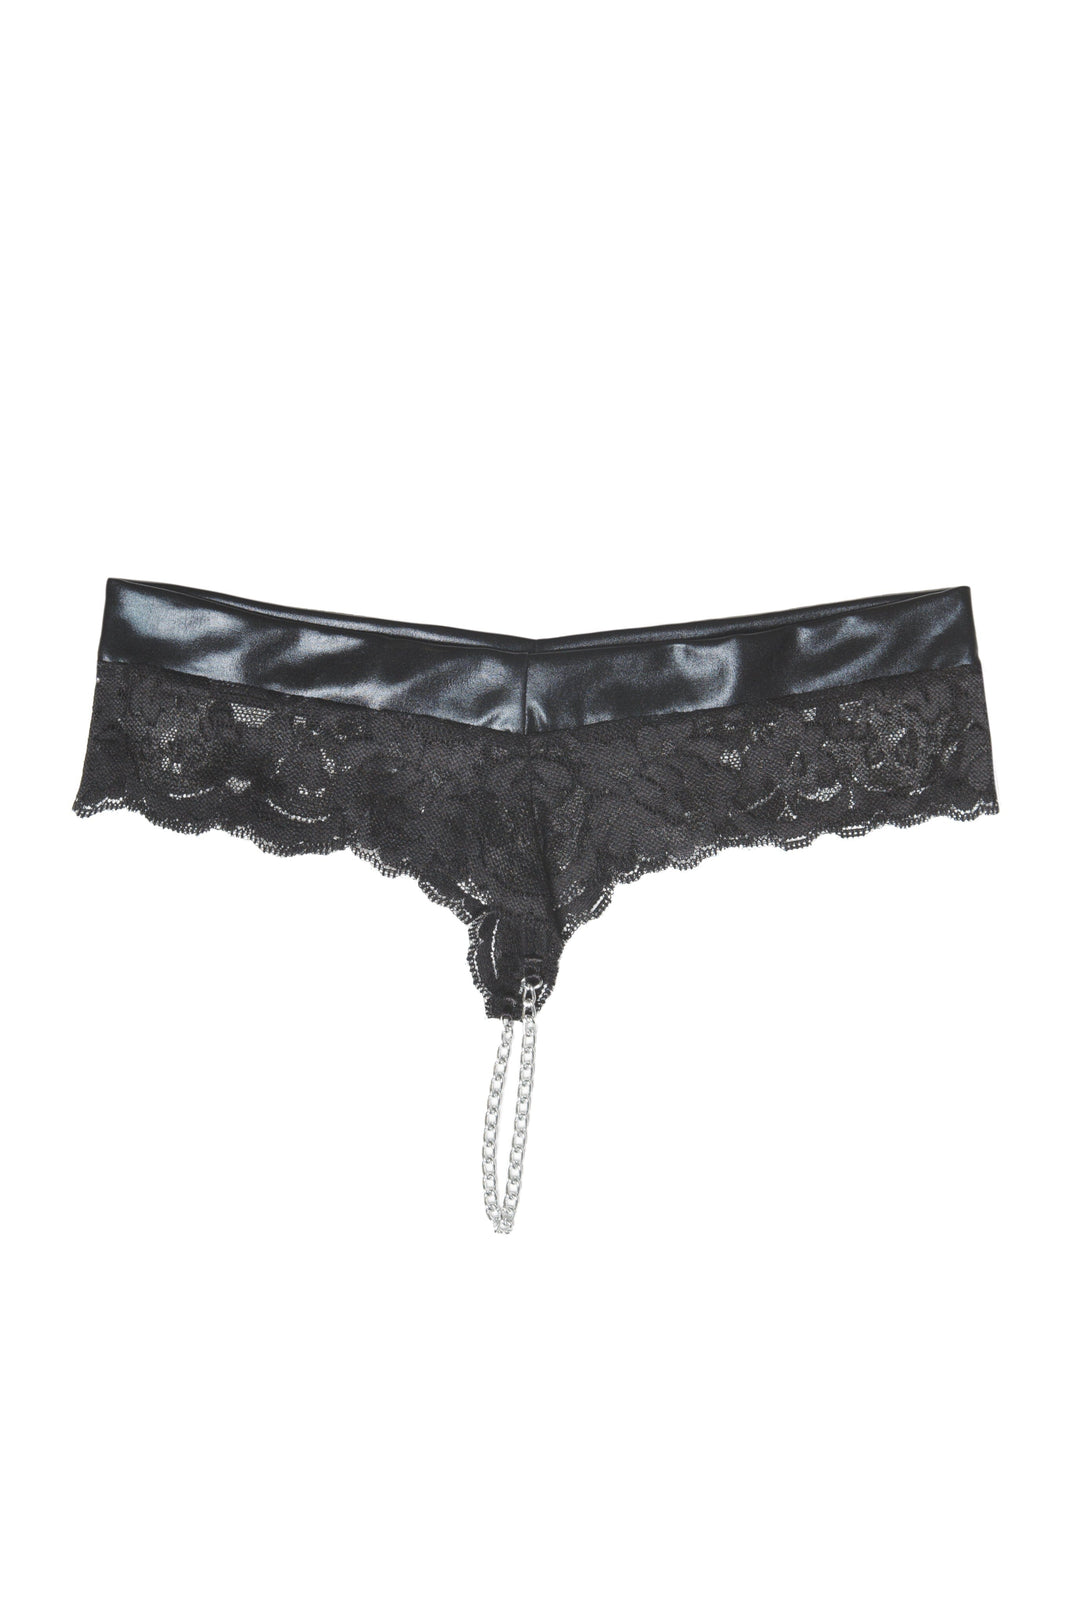 1 PC. Low Rise Wetlook & Scallop Lace Panty W/ Chain Crotch Detail-Panties-Coquette-Black-O/S-SEXYSHOES.COM